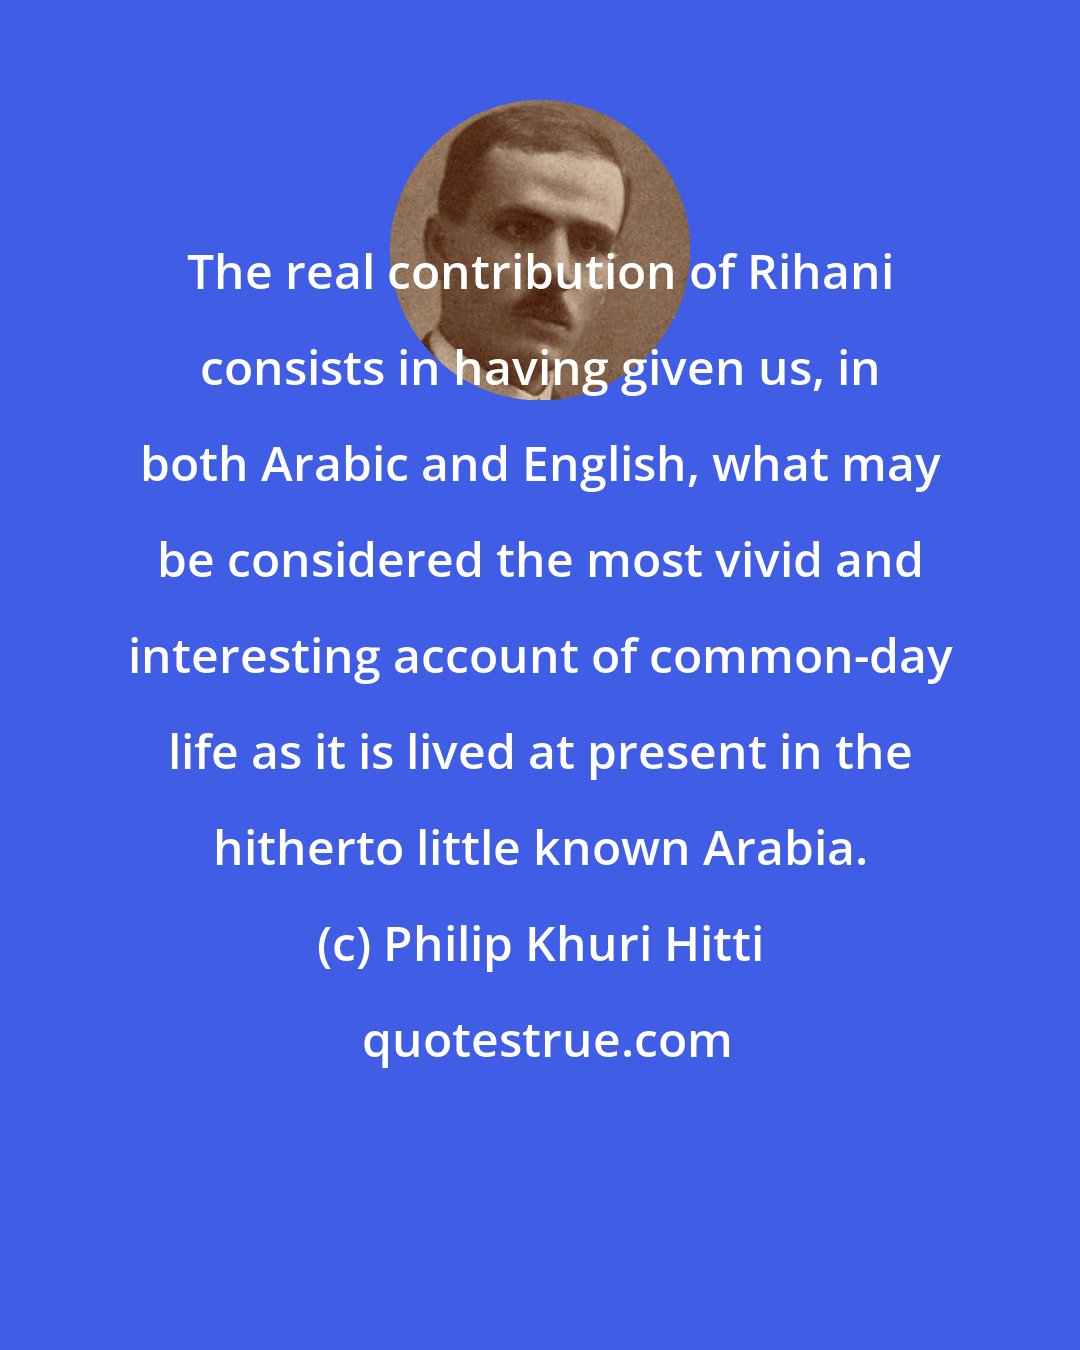 Philip Khuri Hitti: The real contribution of Rihani consists in having given us, in both Arabic and English, what may be considered the most vivid and interesting account of common-day life as it is lived at present in the hitherto little known Arabia.